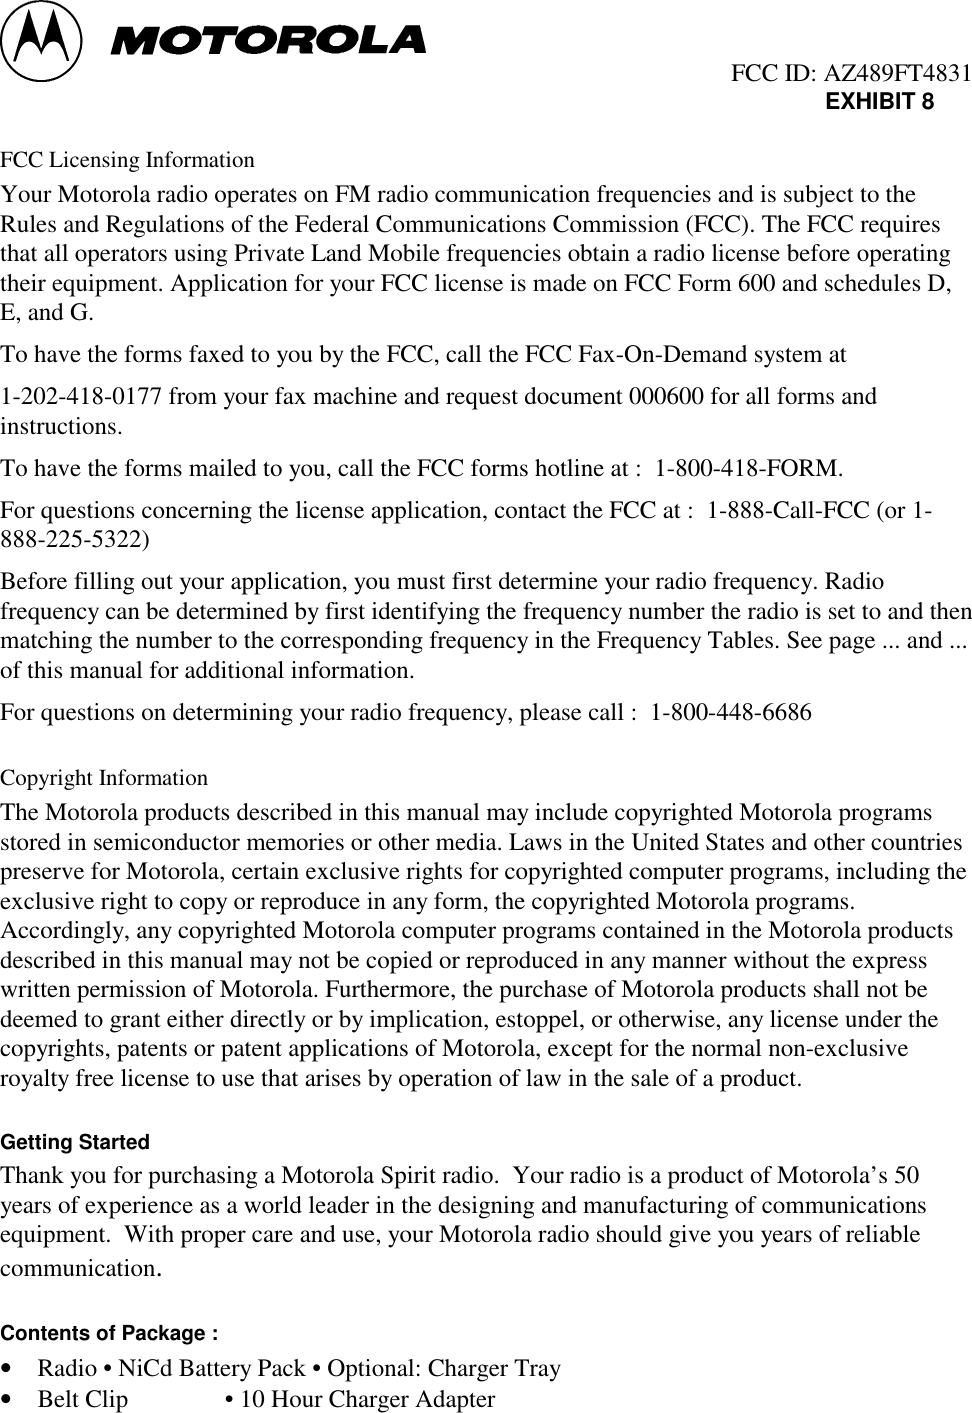                                                  FCC ID: AZ489FT4831EXHIBIT 8FCC Licensing InformationYour Motorola radio operates on FM radio communication frequencies and is subject to theRules and Regulations of the Federal Communications Commission (FCC). The FCC requiresthat all operators using Private Land Mobile frequencies obtain a radio license before operatingtheir equipment. Application for your FCC license is made on FCC Form 600 and schedules D,E, and G.To have the forms faxed to you by the FCC, call the FCC Fax-On-Demand system at1-202-418-0177 from your fax machine and request document 000600 for all forms andinstructions.To have the forms mailed to you, call the FCC forms hotline at :  1-800-418-FORM.For questions concerning the license application, contact the FCC at :  1-888-Call-FCC (or 1-888-225-5322)Before filling out your application, you must first determine your radio frequency. Radiofrequency can be determined by first identifying the frequency number the radio is set to and thenmatching the number to the corresponding frequency in the Frequency Tables. See page ... and ...of this manual for additional information.For questions on determining your radio frequency, please call :  1-800-448-6686Copyright InformationThe Motorola products described in this manual may include copyrighted Motorola programsstored in semiconductor memories or other media. Laws in the United States and other countriespreserve for Motorola, certain exclusive rights for copyrighted computer programs, including theexclusive right to copy or reproduce in any form, the copyrighted Motorola programs.Accordingly, any copyrighted Motorola computer programs contained in the Motorola productsdescribed in this manual may not be copied or reproduced in any manner without the expresswritten permission of Motorola. Furthermore, the purchase of Motorola products shall not bedeemed to grant either directly or by implication, estoppel, or otherwise, any license under thecopyrights, patents or patent applications of Motorola, except for the normal non-exclusiveroyalty free license to use that arises by operation of law in the sale of a product.Getting StartedThank you for purchasing a Motorola Spirit radio.  Your radio is a product of Motorola’s 50years of experience as a world leader in the designing and manufacturing of communicationsequipment.  With proper care and use, your Motorola radio should give you years of reliablecommunication.Contents of Package :• Radio • NiCd Battery Pack • Optional: Charger Tray• Belt Clip • 10 Hour Charger Adapter